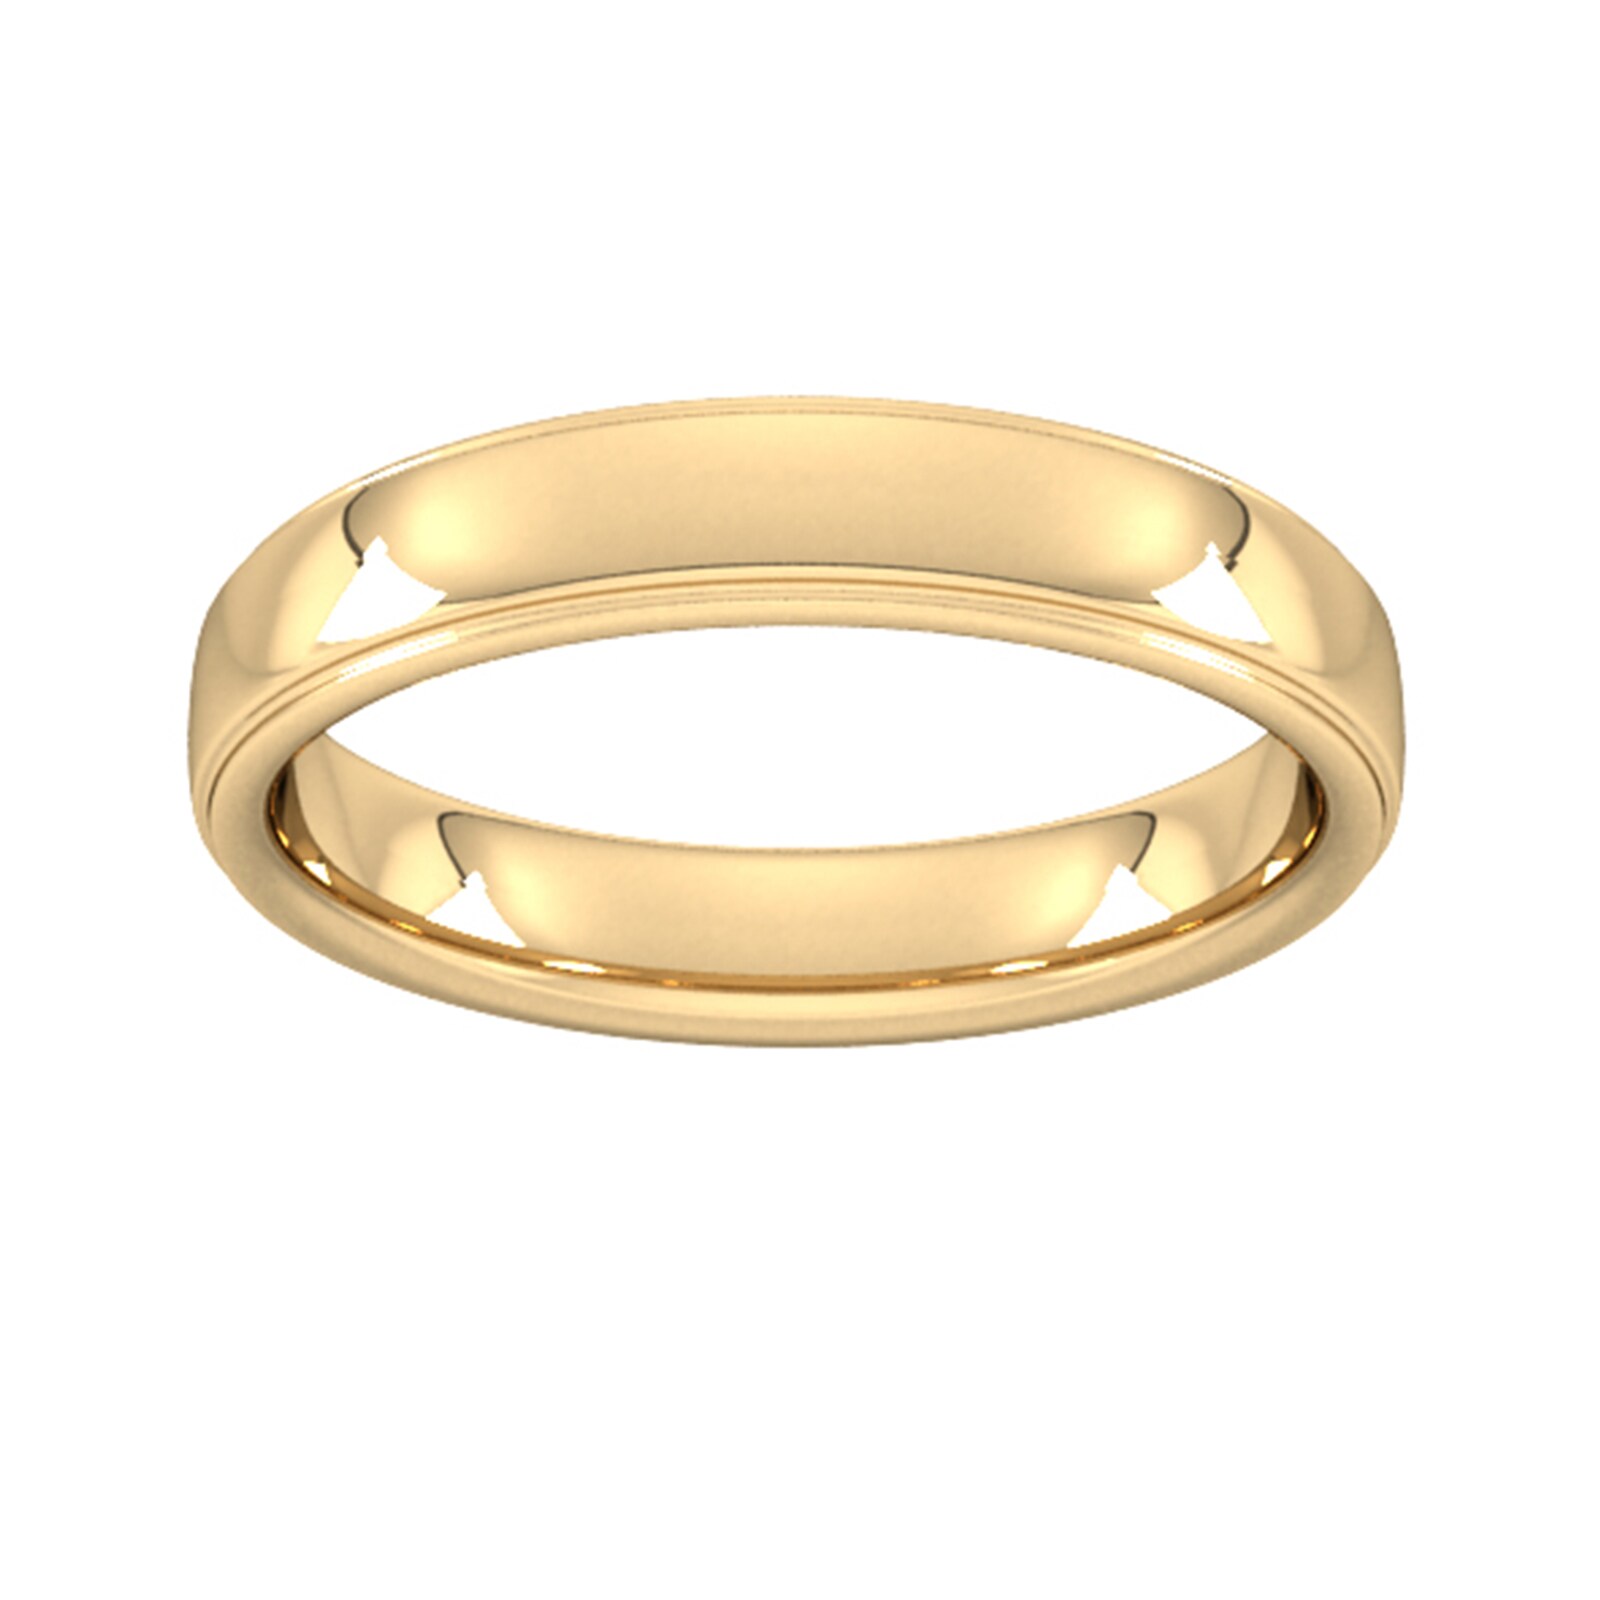 4mm Slight Court Heavy Polished Finish With Grooves Wedding Ring In 18 Carat Yellow Gold - Ring Size N